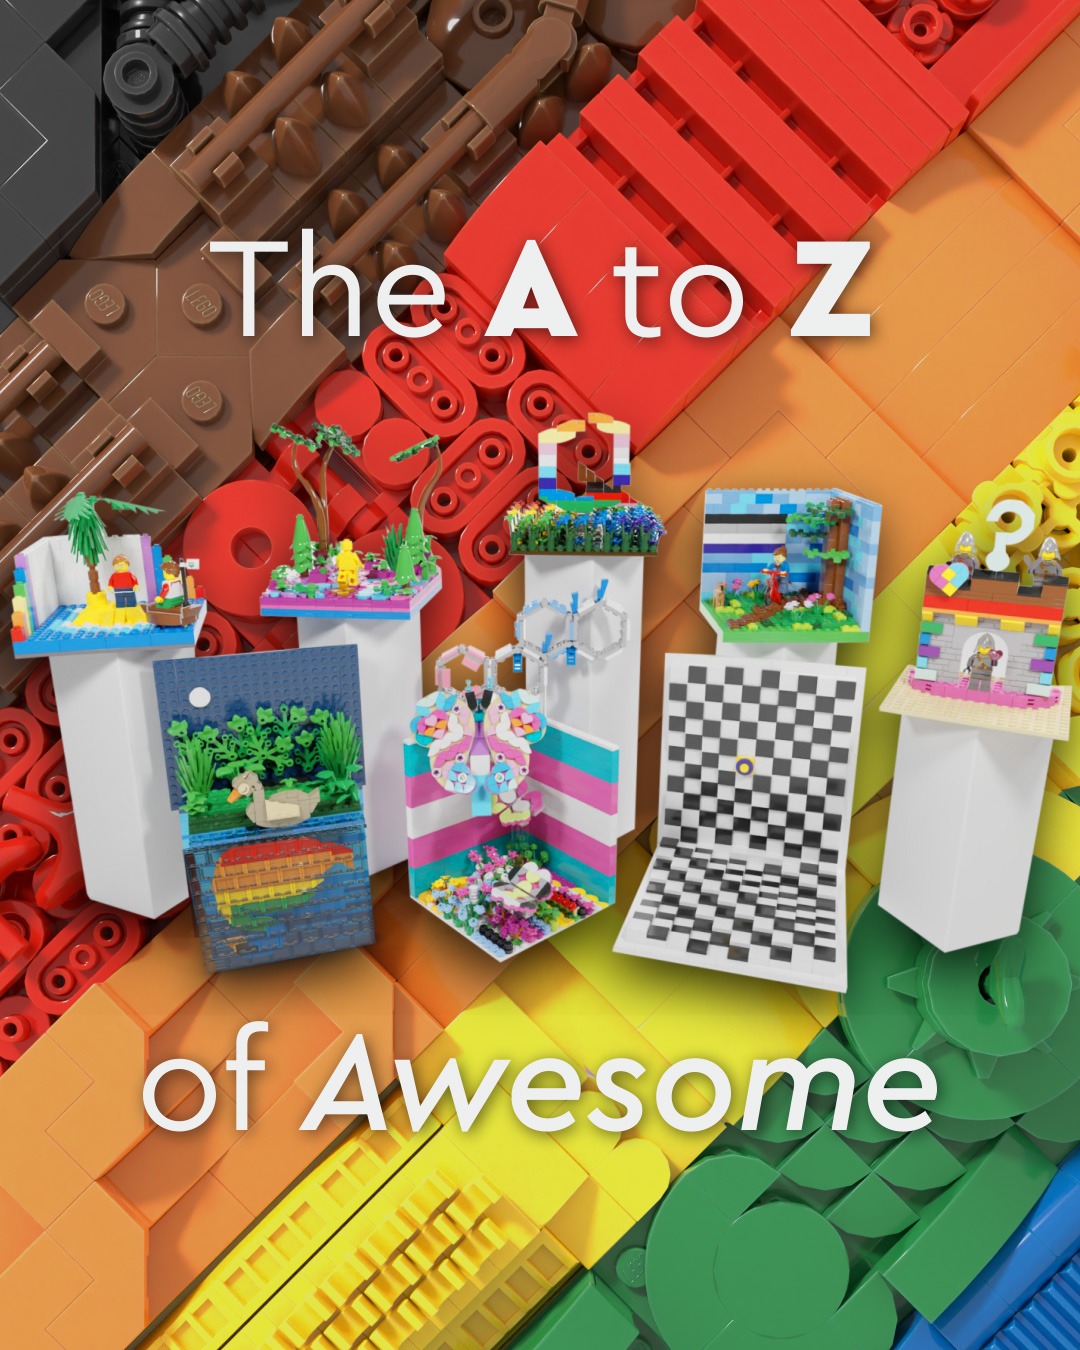 The A-Z Awesome – Because Self Expression Identity - About Us - LEGO.com